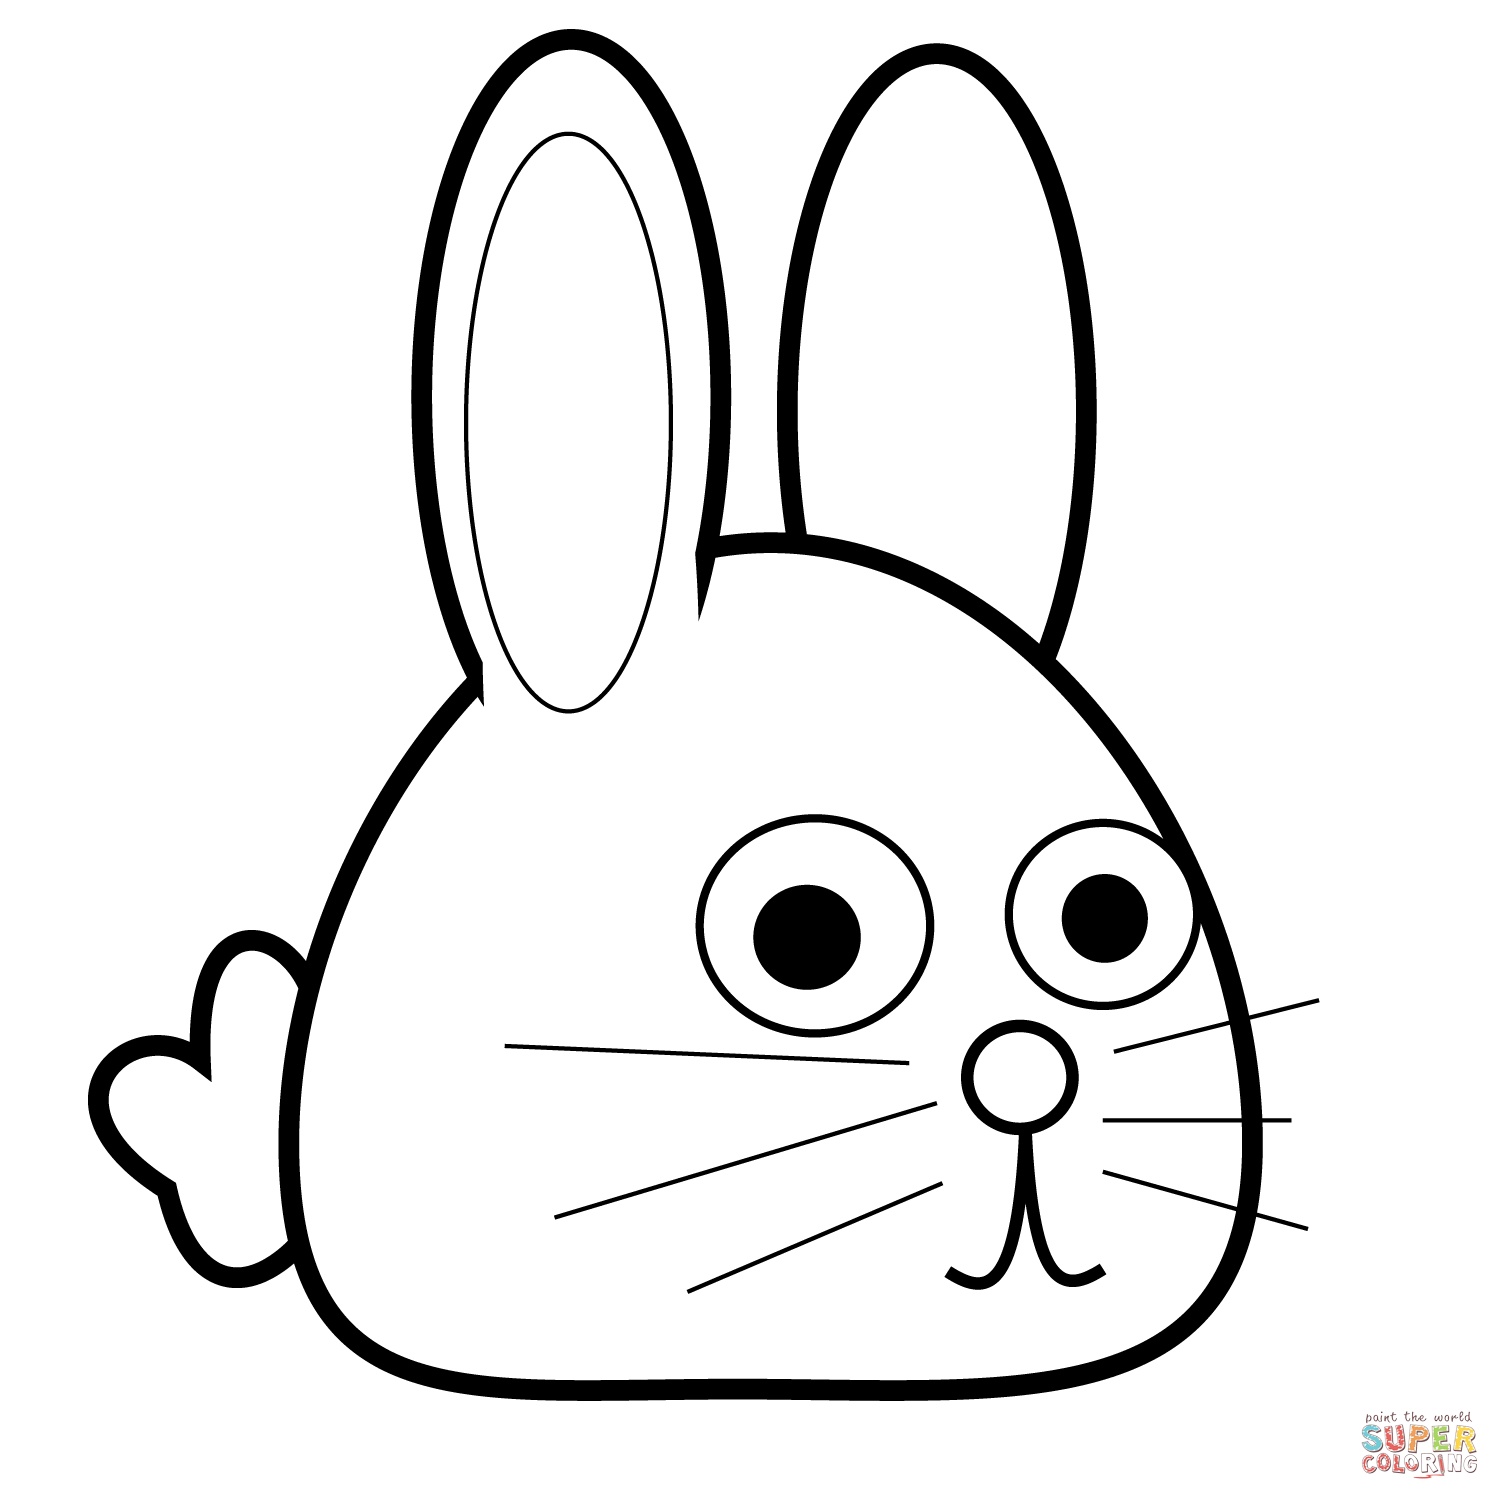 Cute Bunny Coloring Pages at Free printable